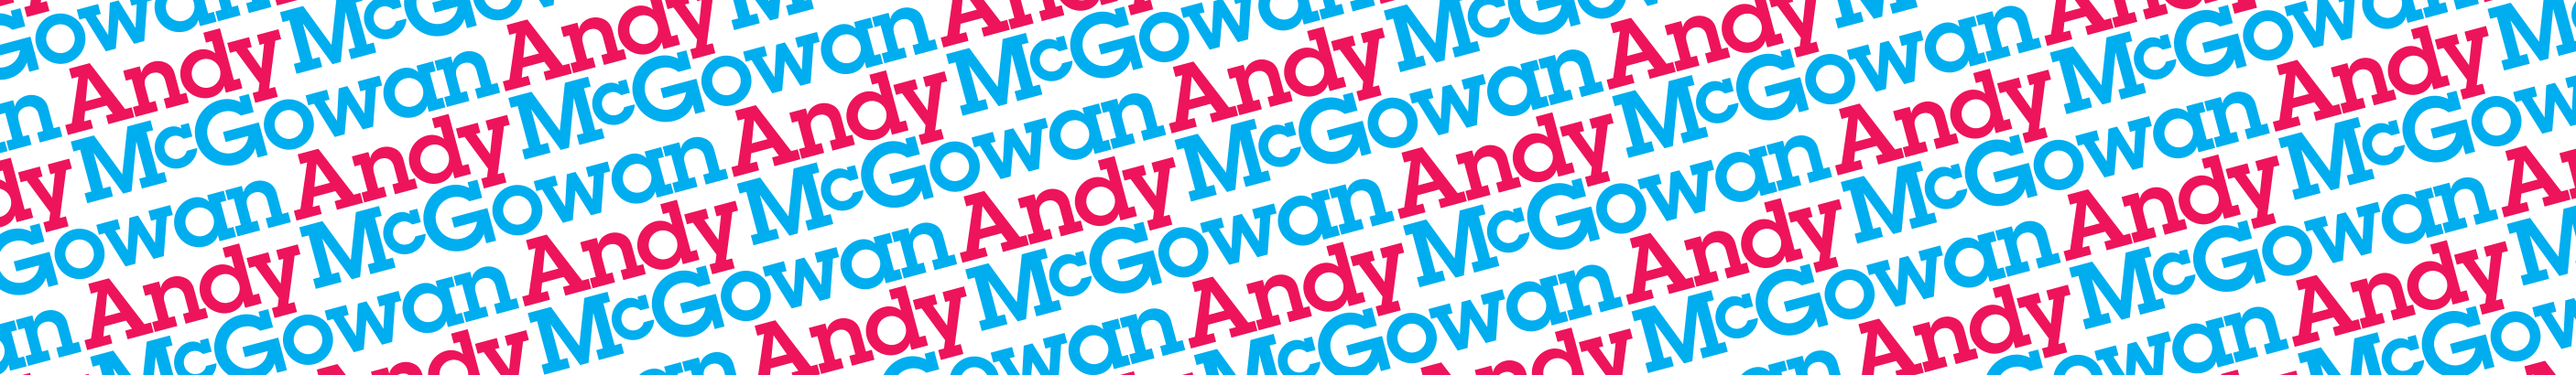 Andy McGowan's profile banner